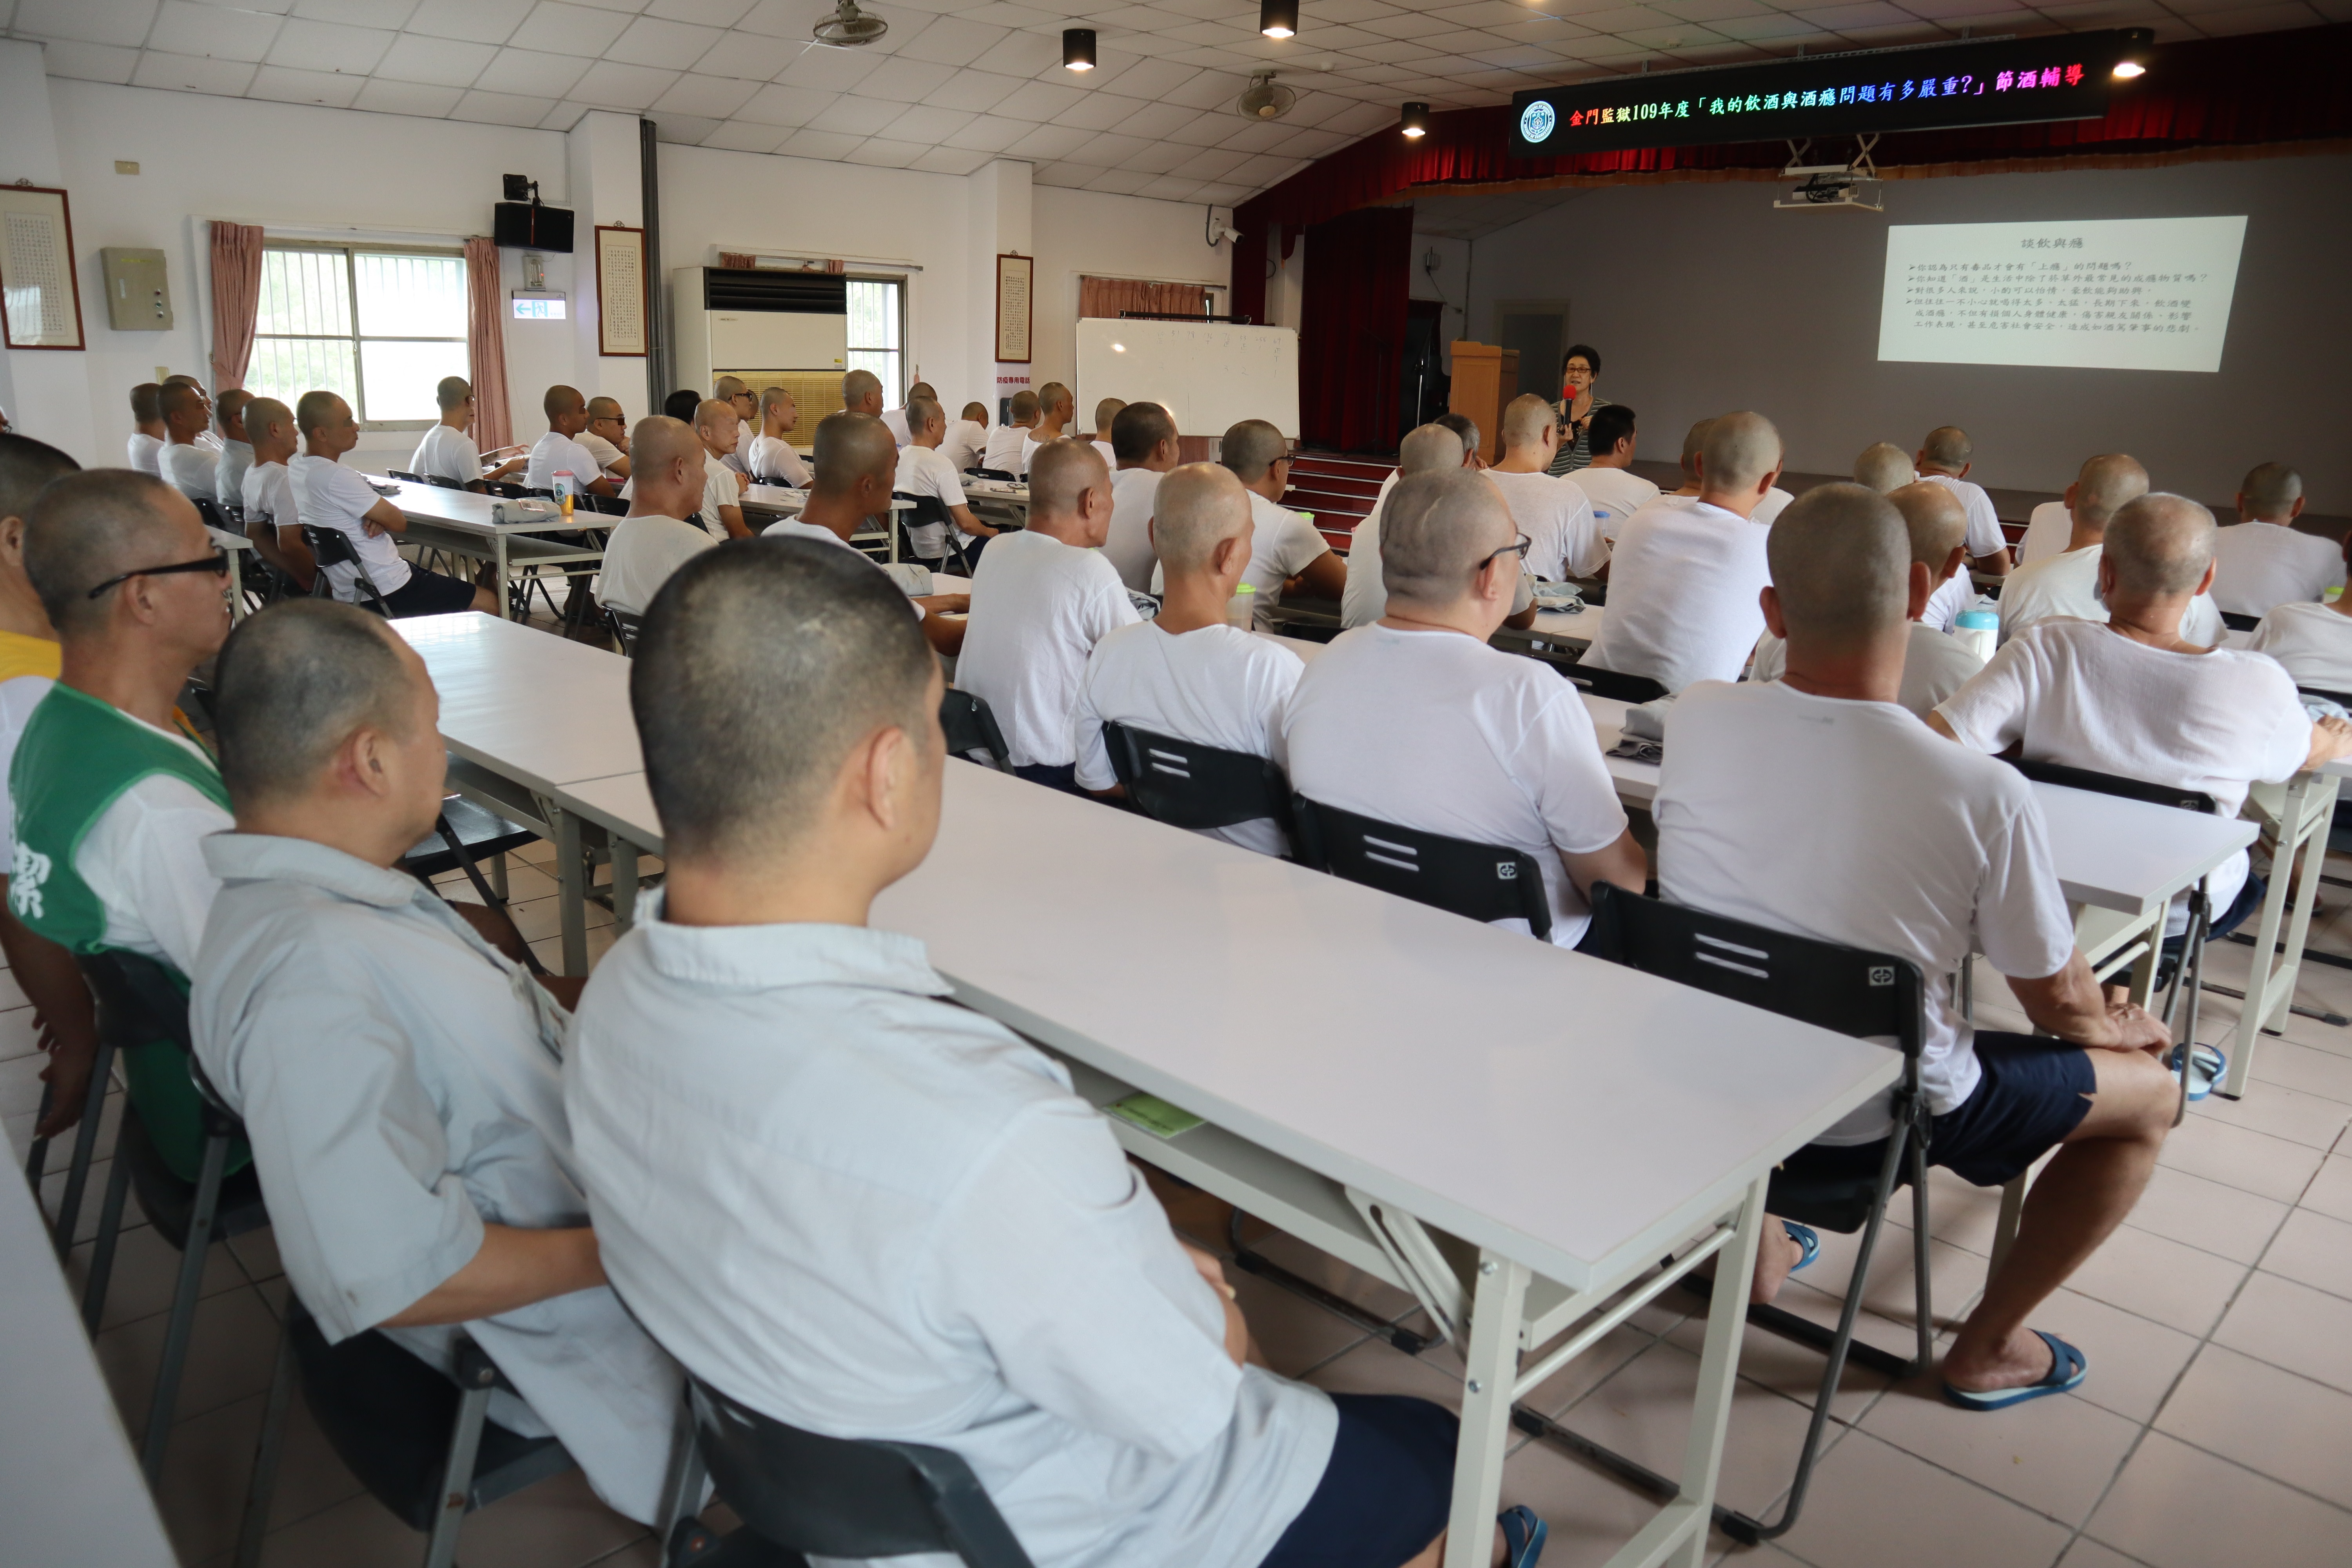 The lecturer taught inmates how to drink and drink healthy.